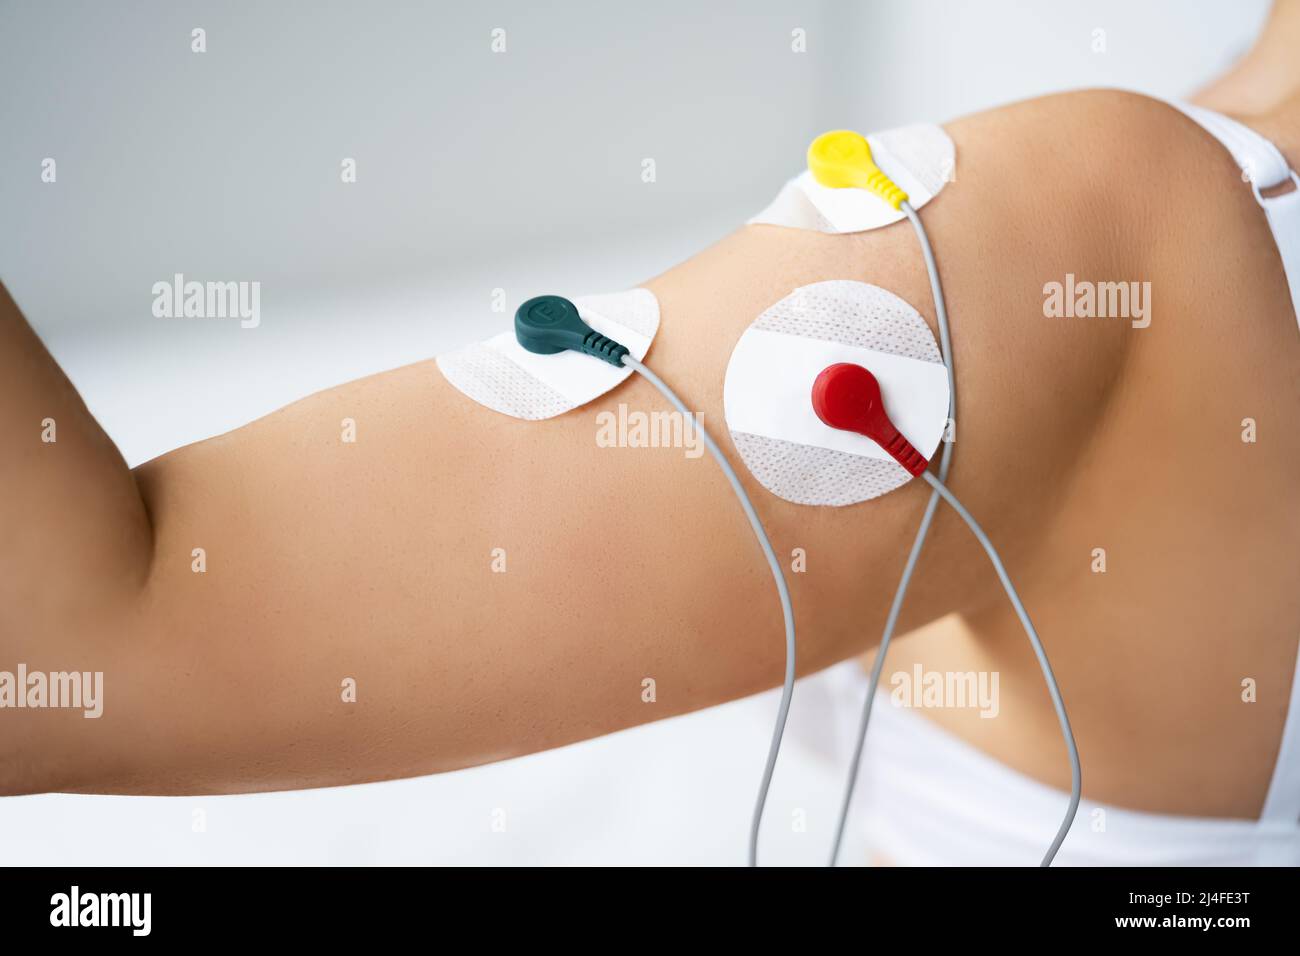 Electrode Arm Stimulation And Training. Pain Therapy And Massage Stock Photo